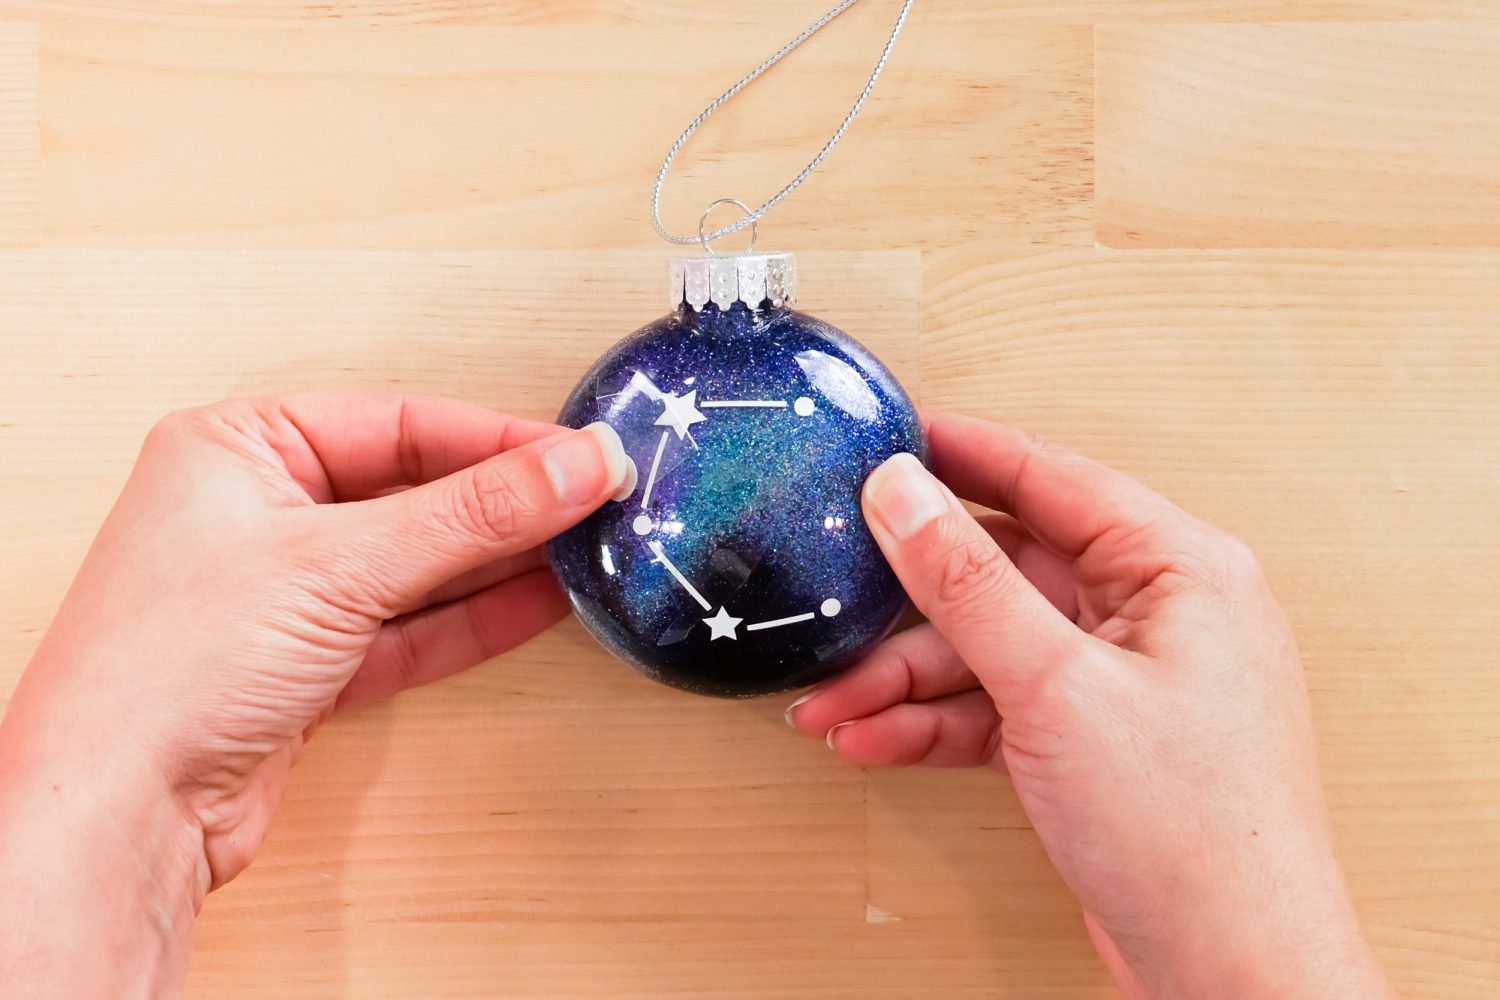 Hands peeling back the transfer tape to reveal the final ornament.